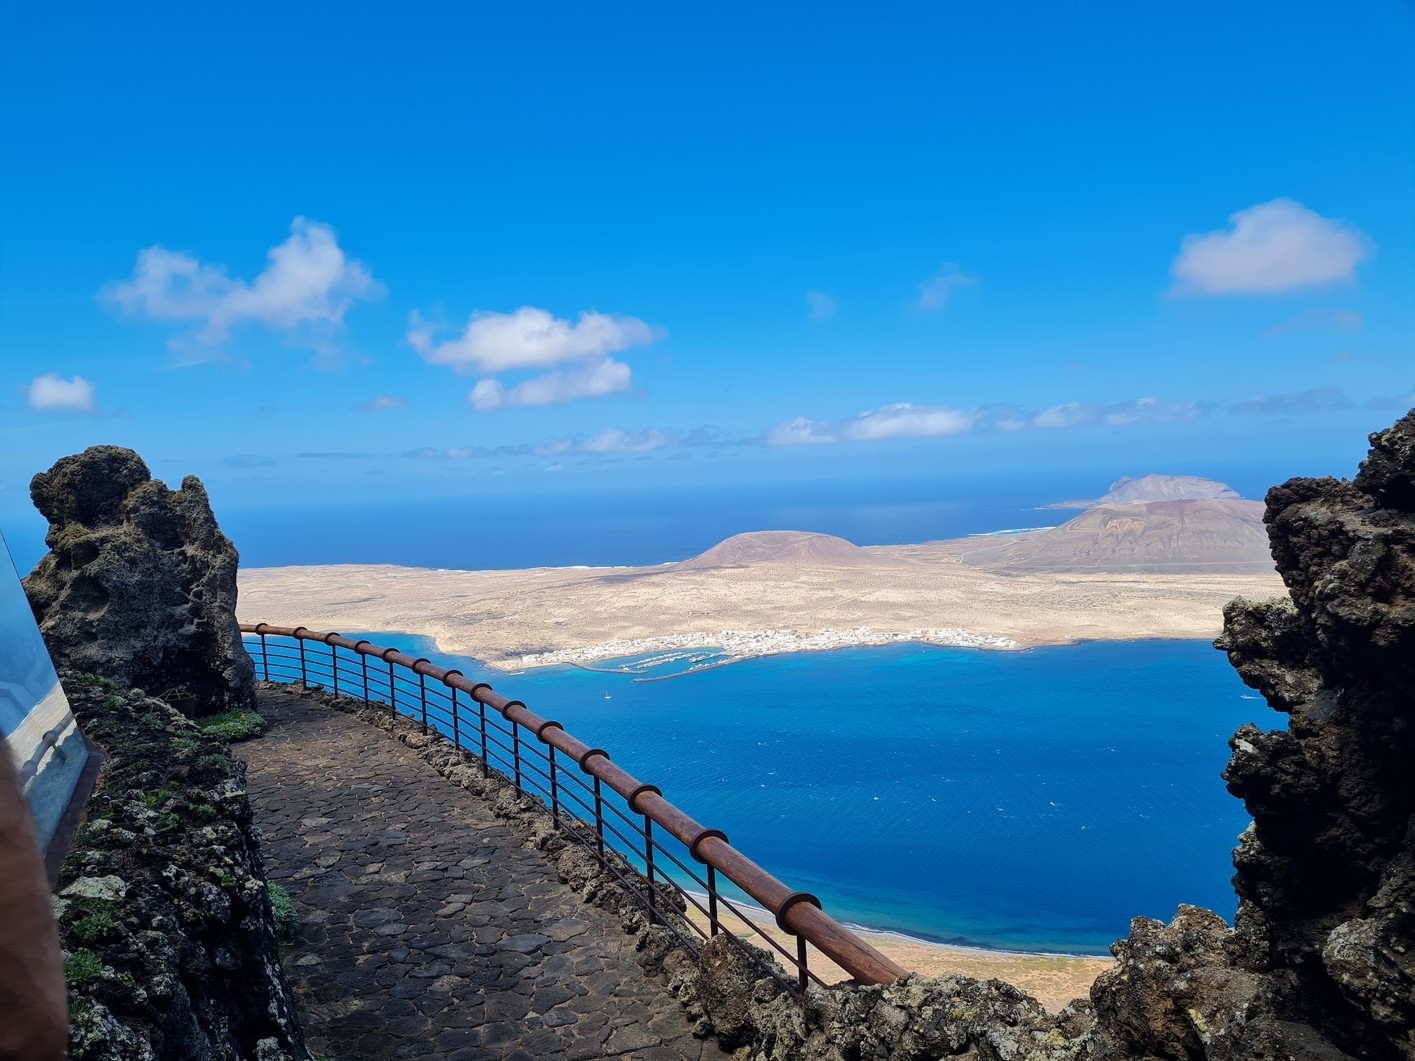 You can visit Lanzarote all year round